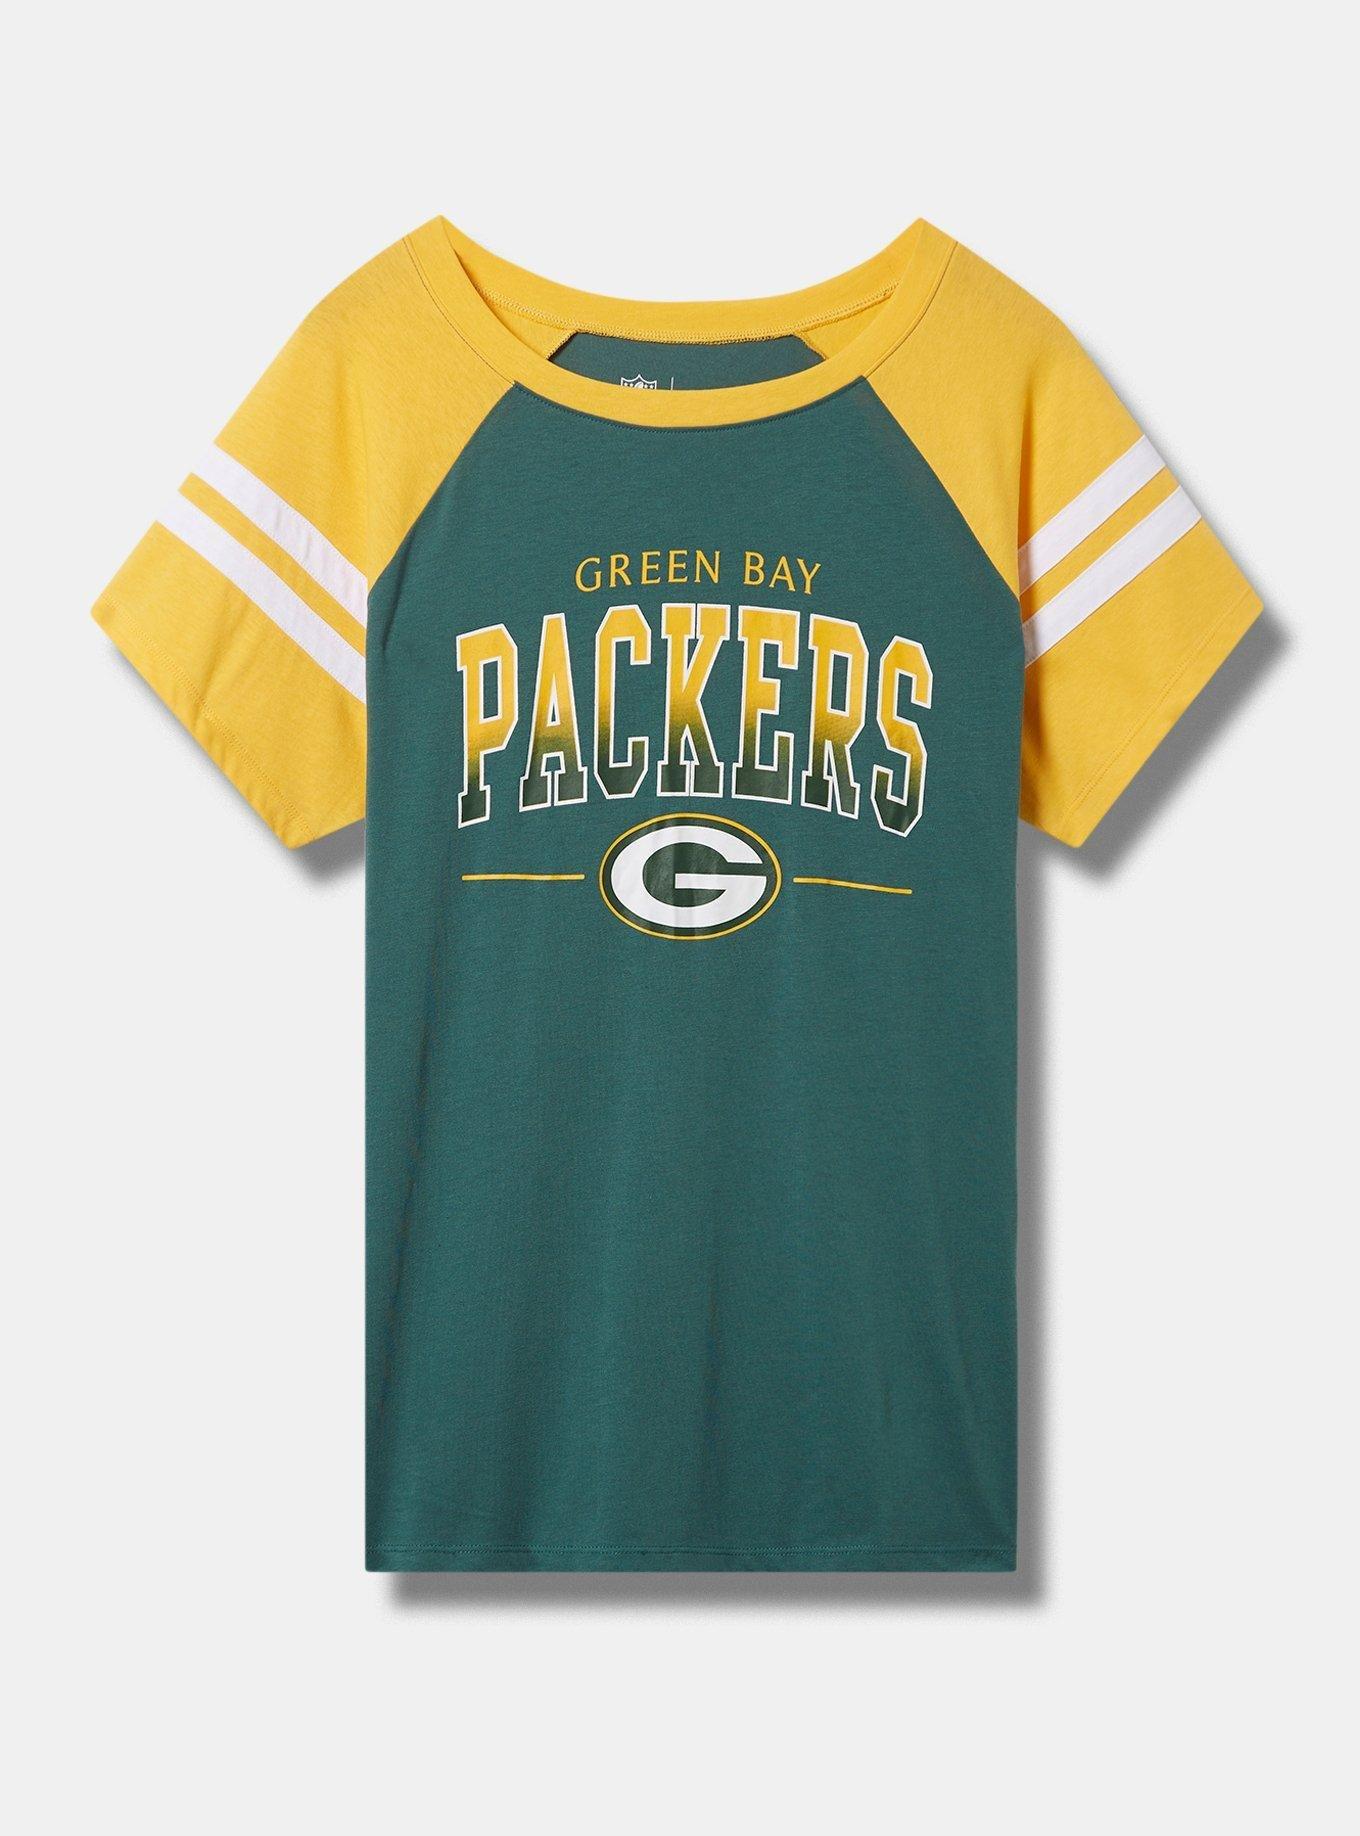 Green Bay Packers Women's Sleeve Stripe 3/4 T-Shirt at the Packers